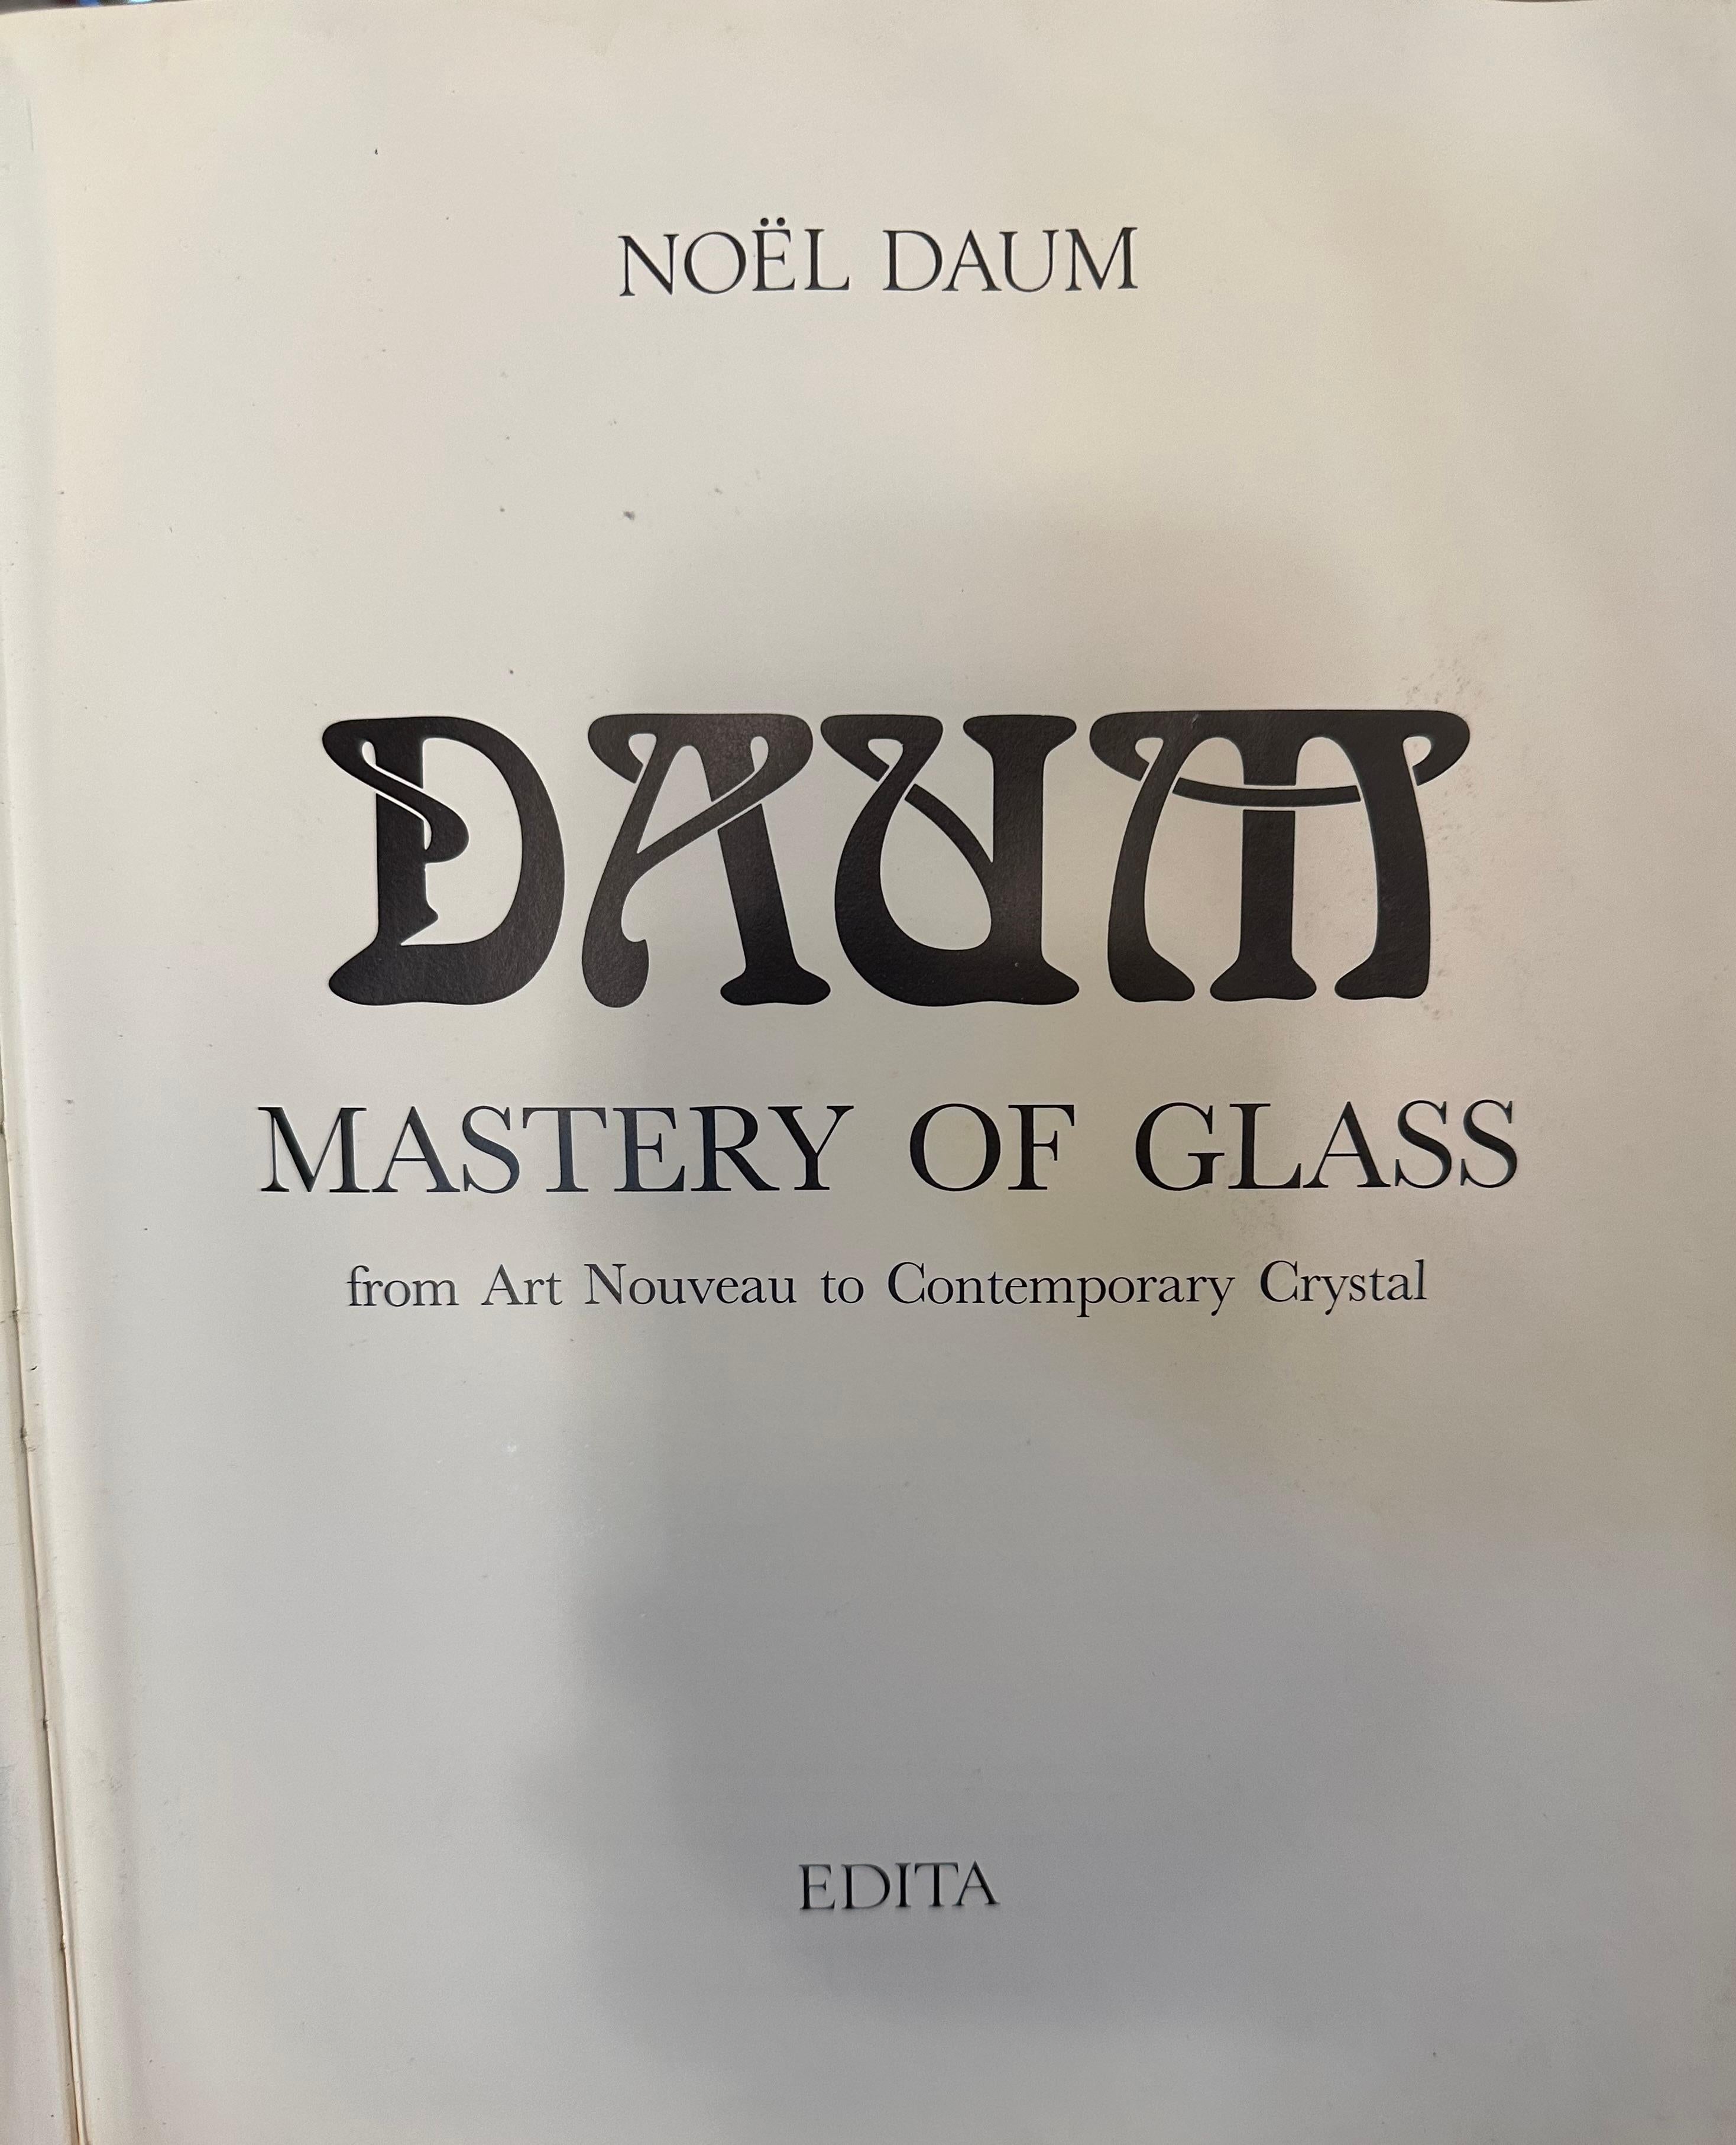 Daum Nancy 
Daum is the name of a factory established in 1875 in the city of Nancy, France. When the notary Jean Daum became the owner of an industrial furnace, that of Nancy Glass, to expropriate the owners who were heavily indebted to him and was